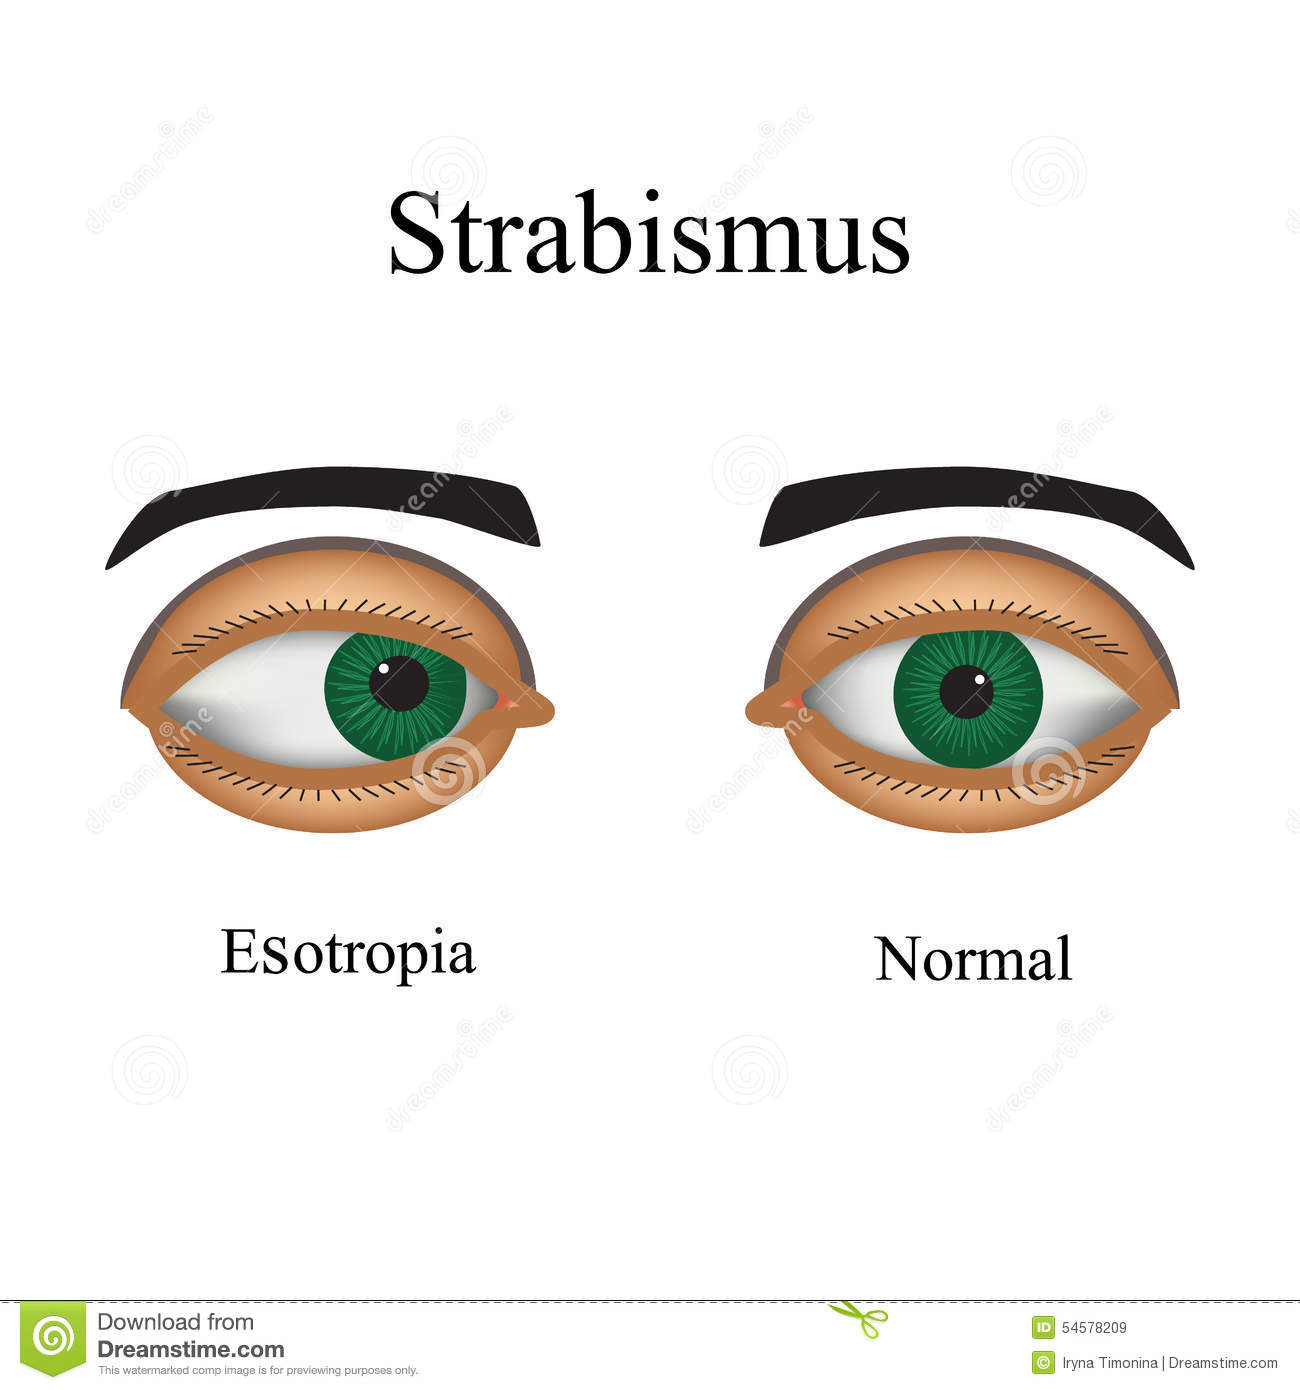 Guest Blog: Strabismus Surgery- Cure For Strabismus Disorder